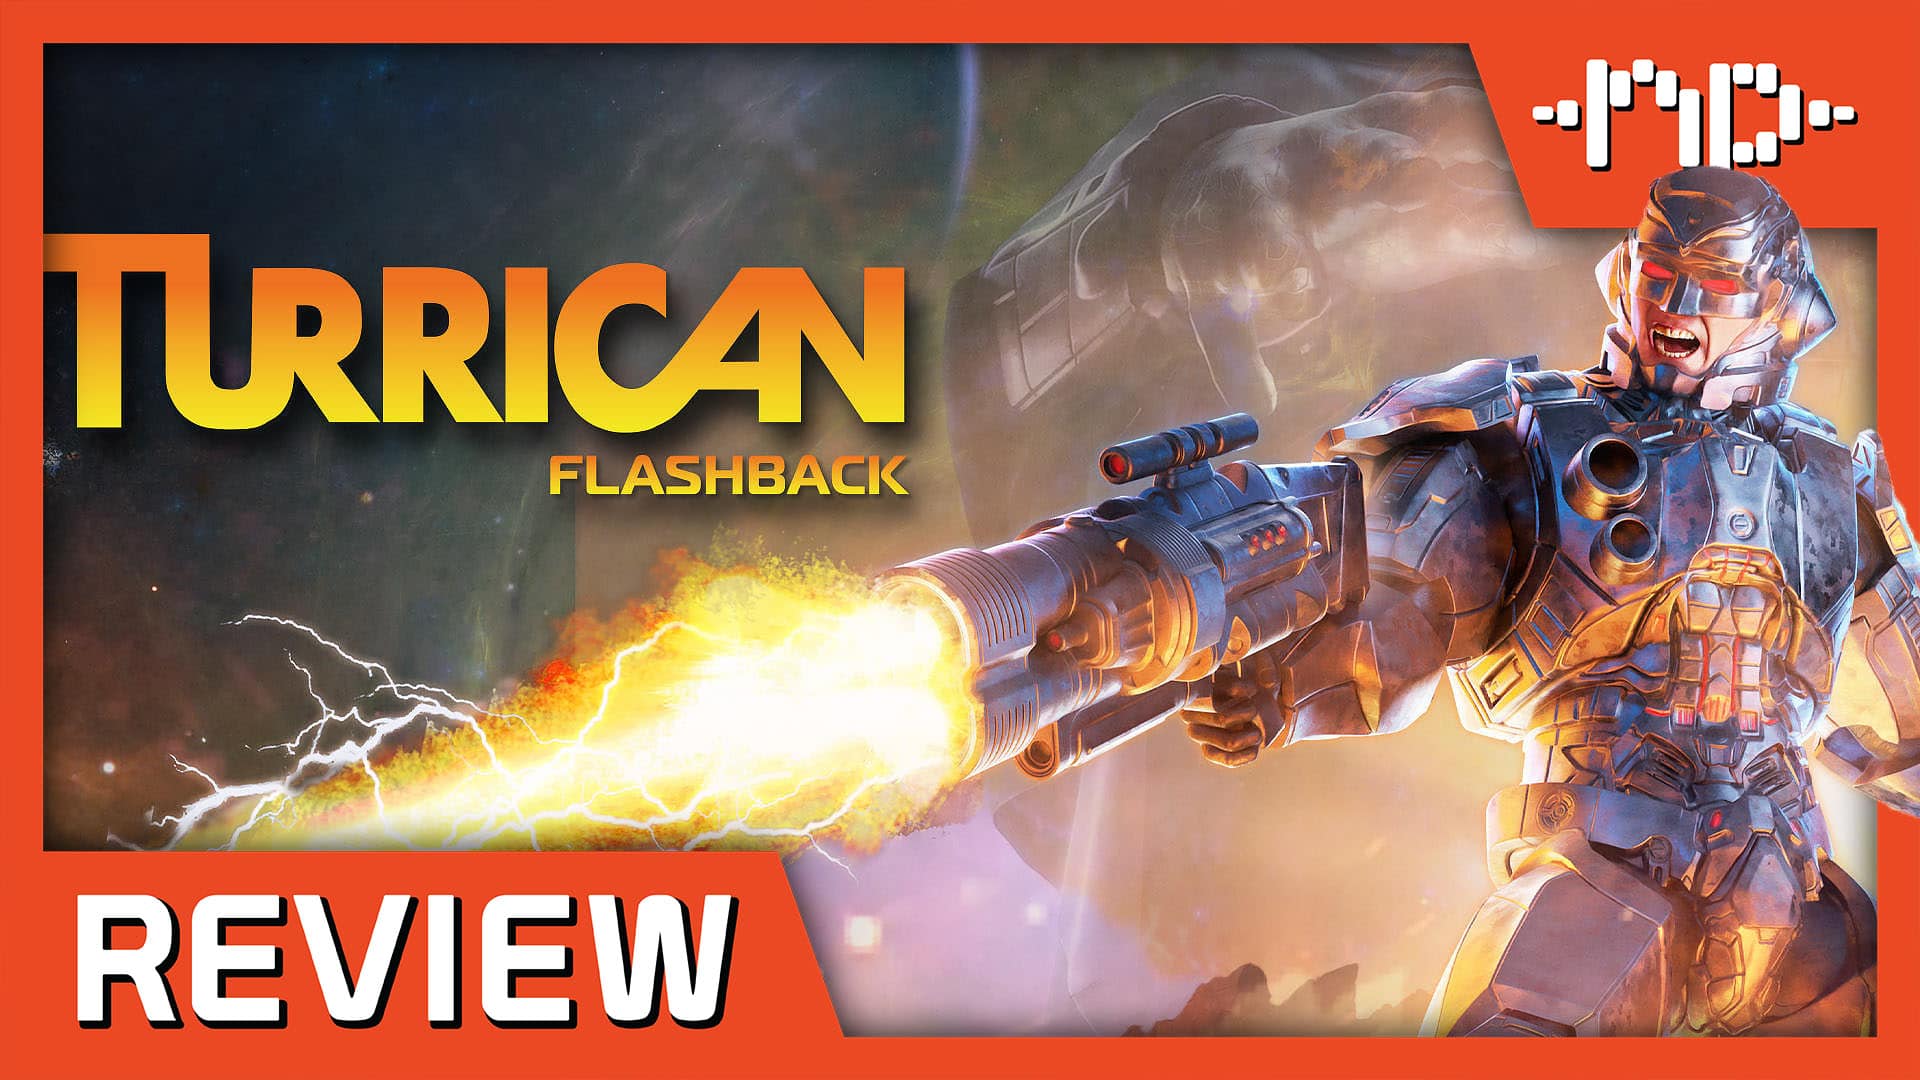 Turrican Flashback Review – Amiga for Millenials